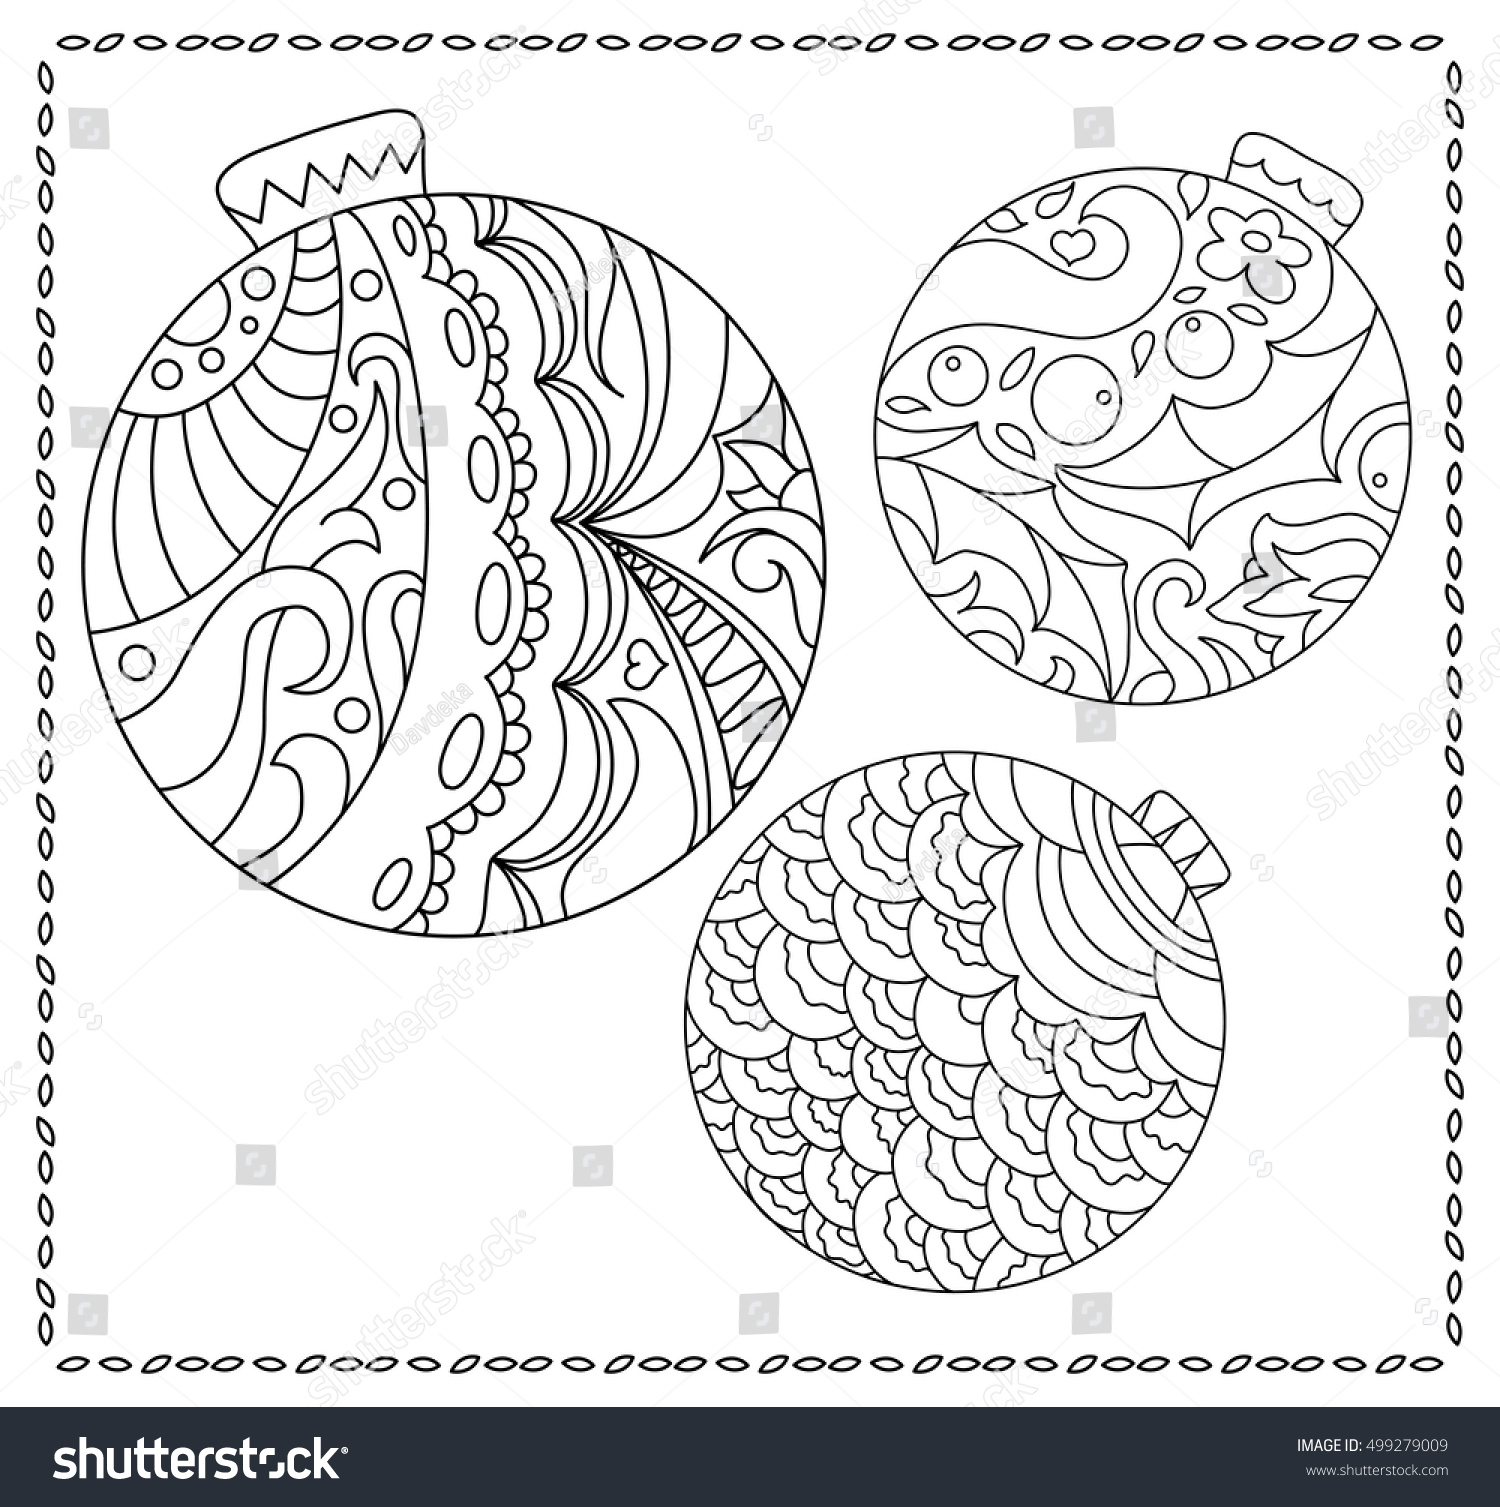 Christmas fir tree ornament coloring page Adult or teen coloring page with Christmas or New